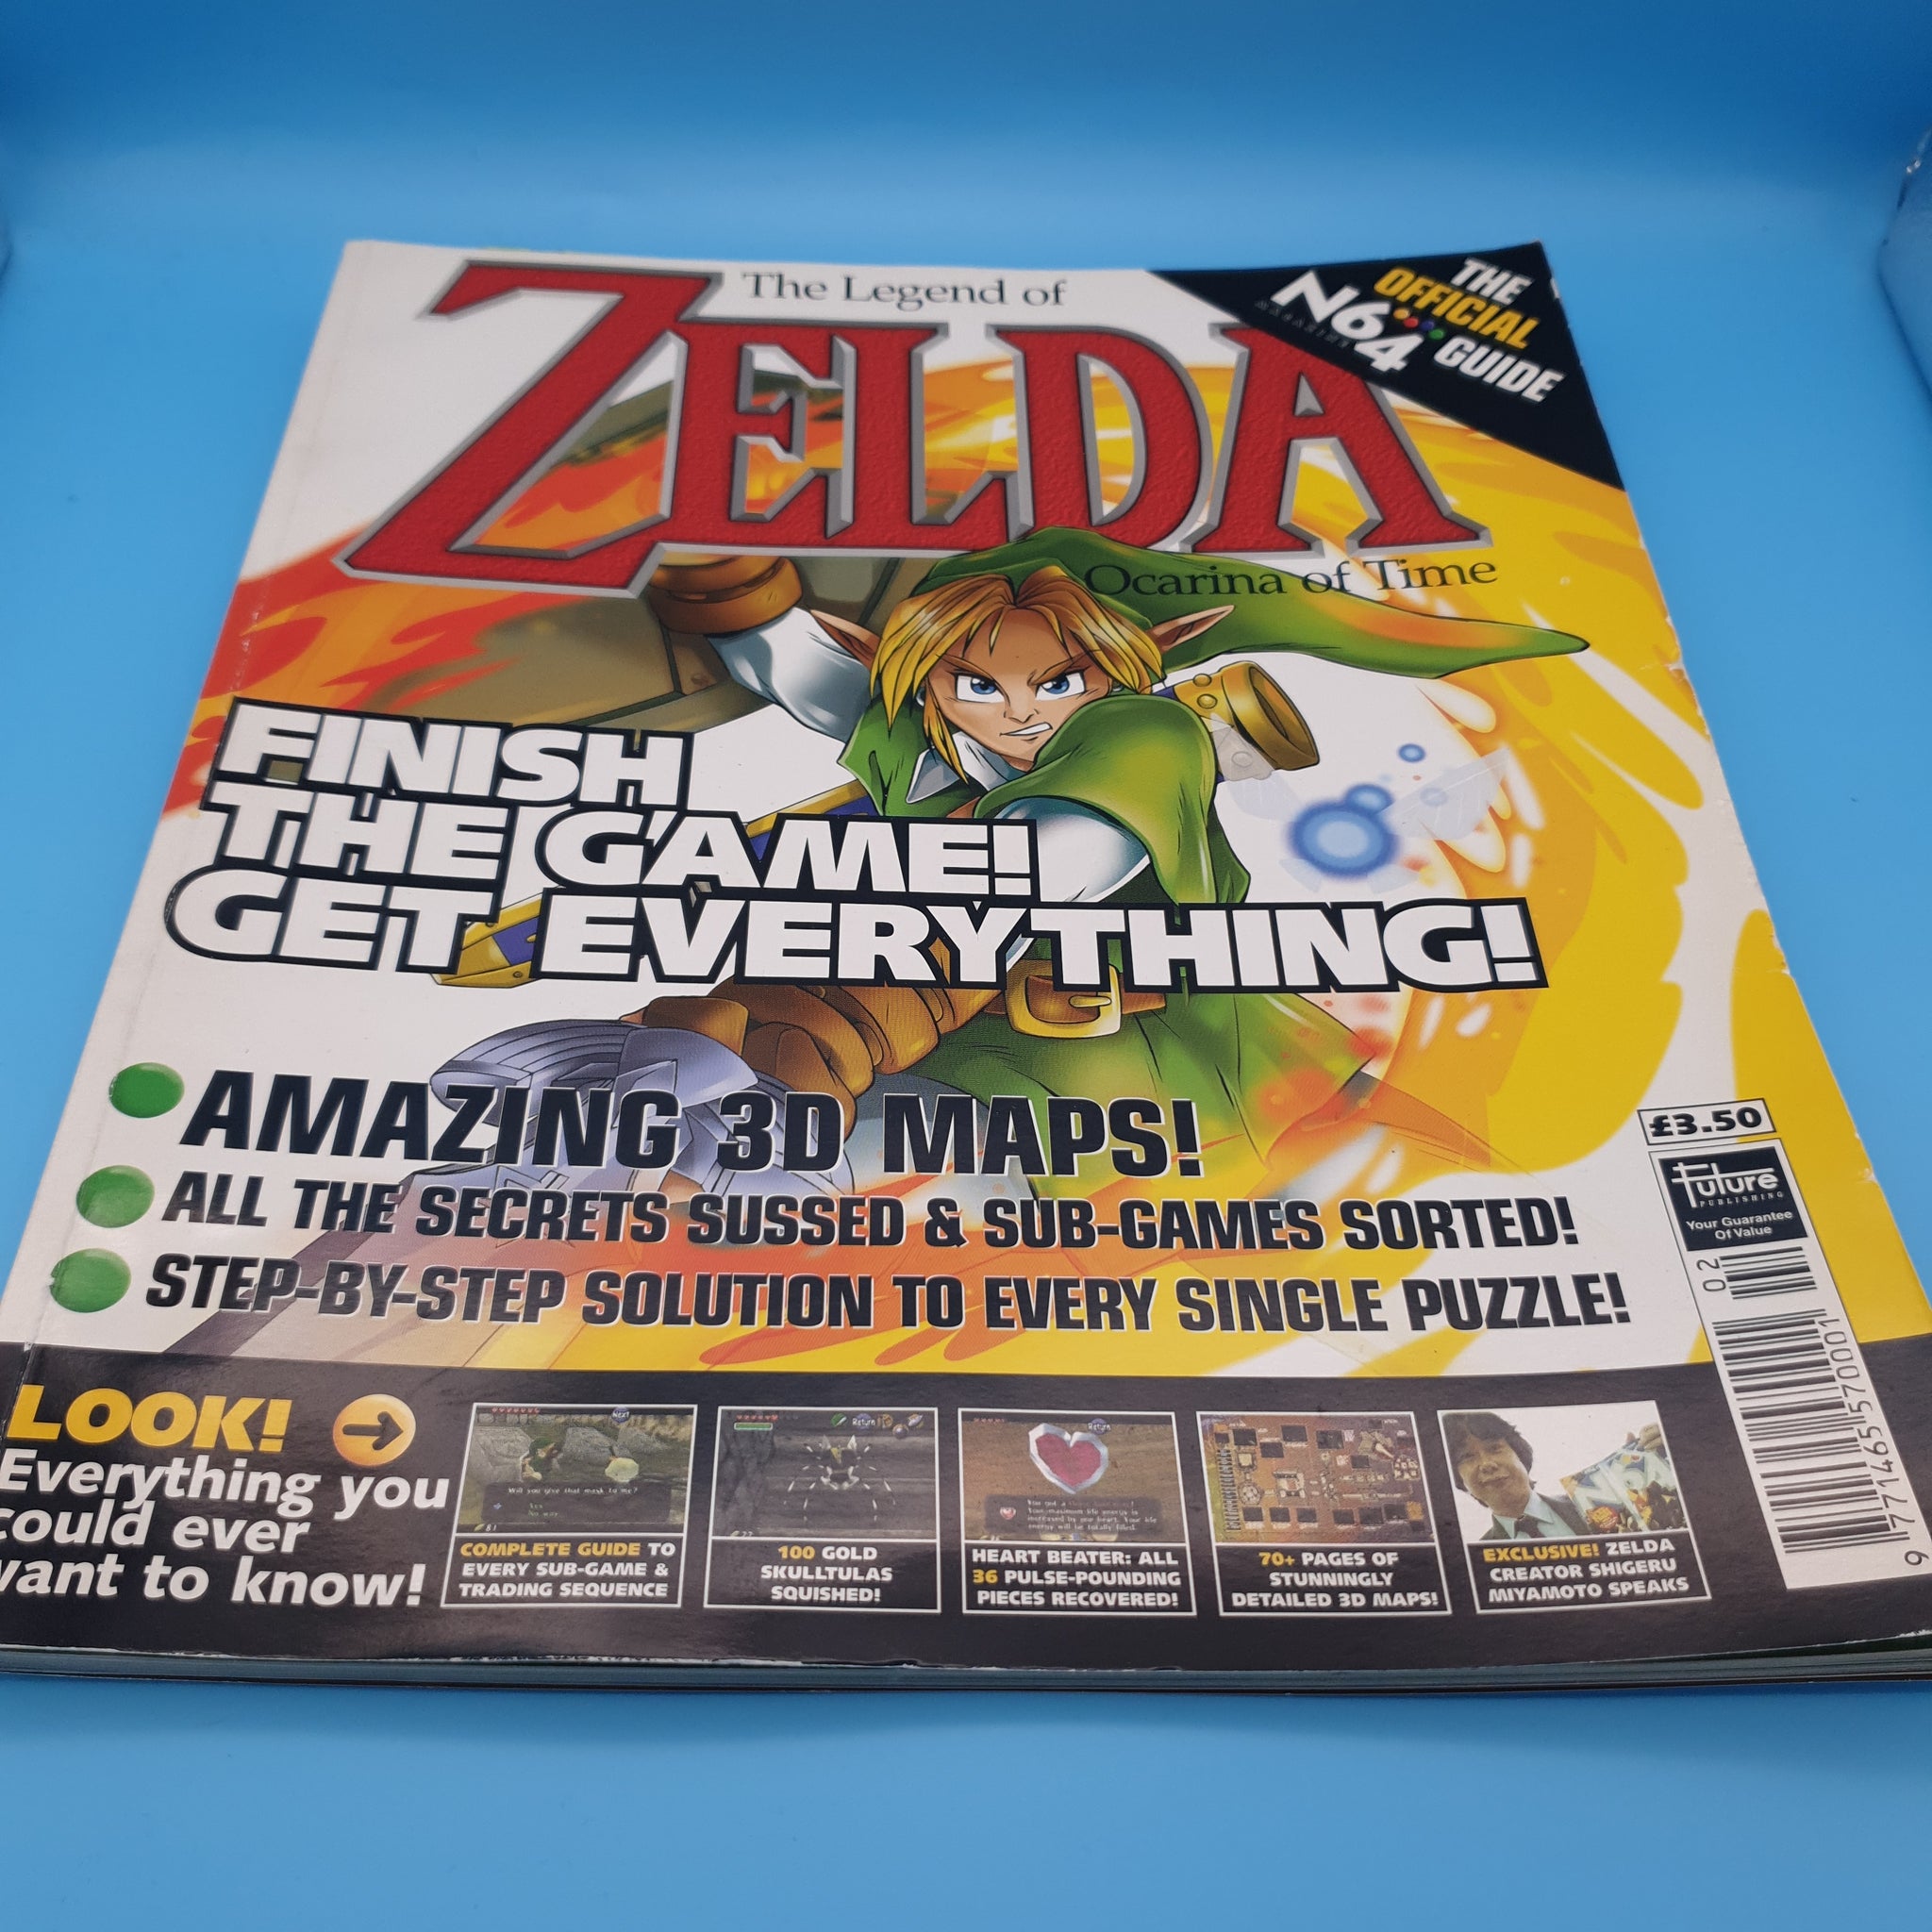 THE OFFICAL N64 MAGZINE GUIDE